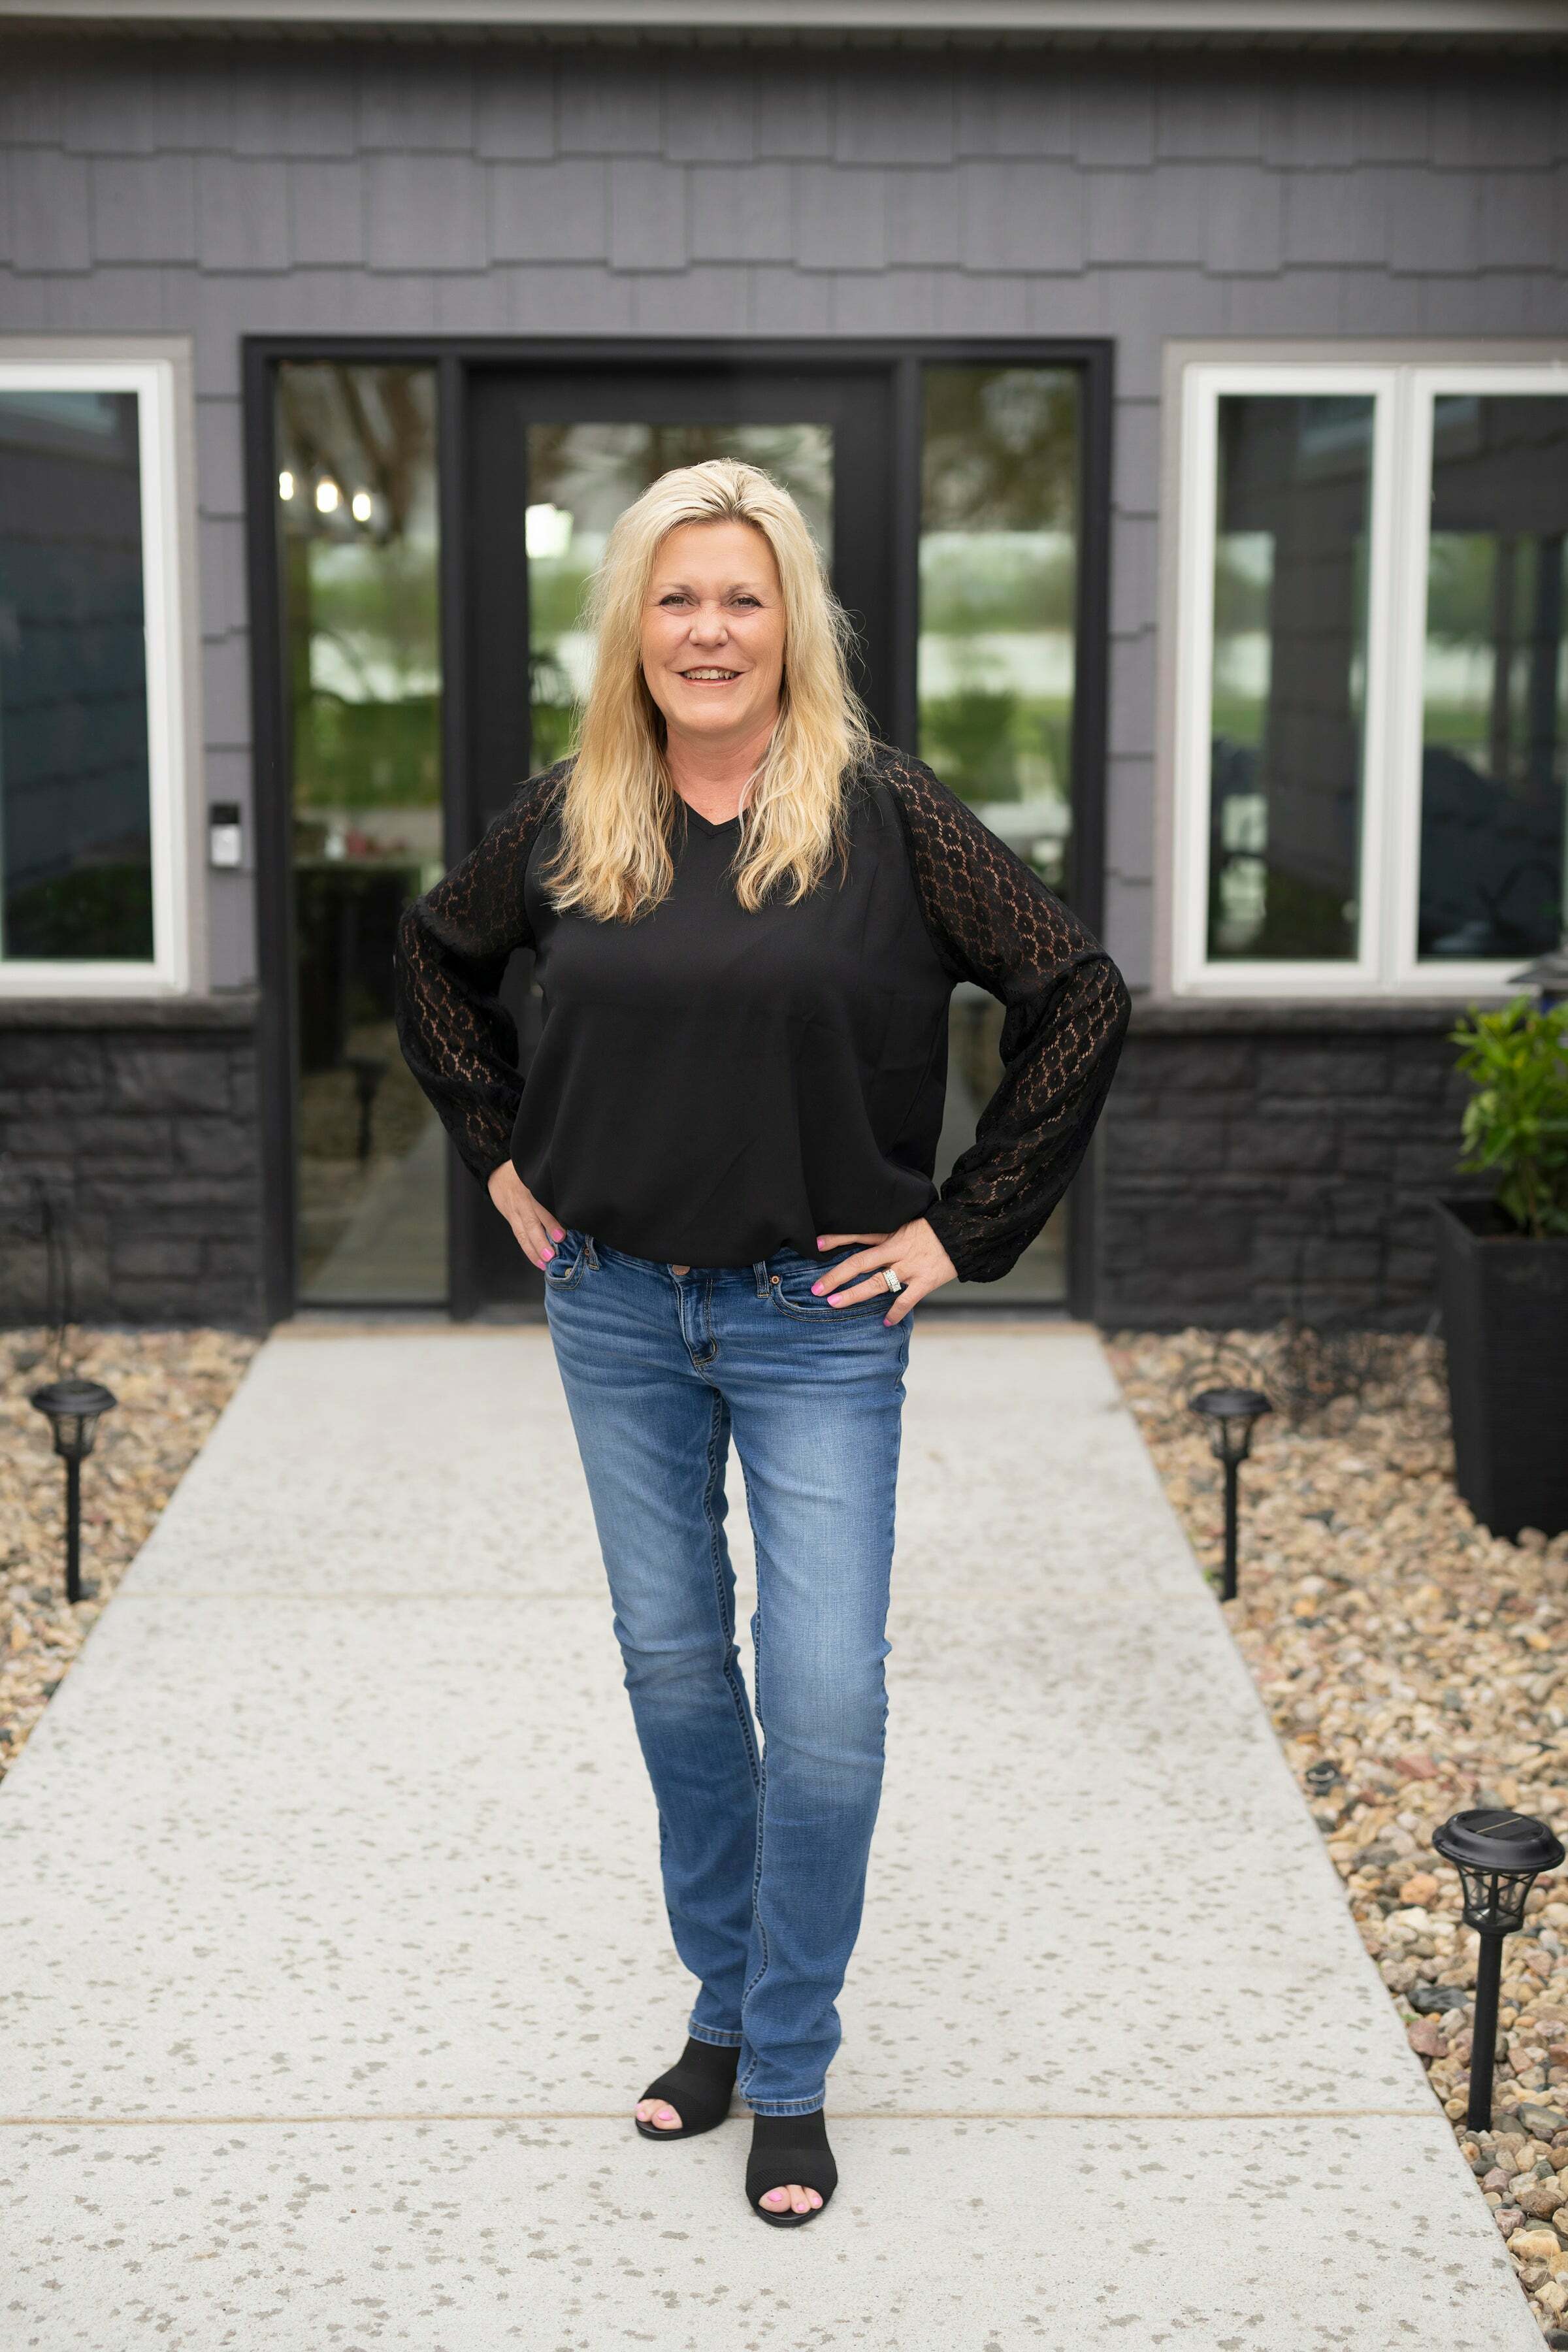 Michelle Hiers, Associate Real Estate Broker in Council Bluffs, The Good Life Group